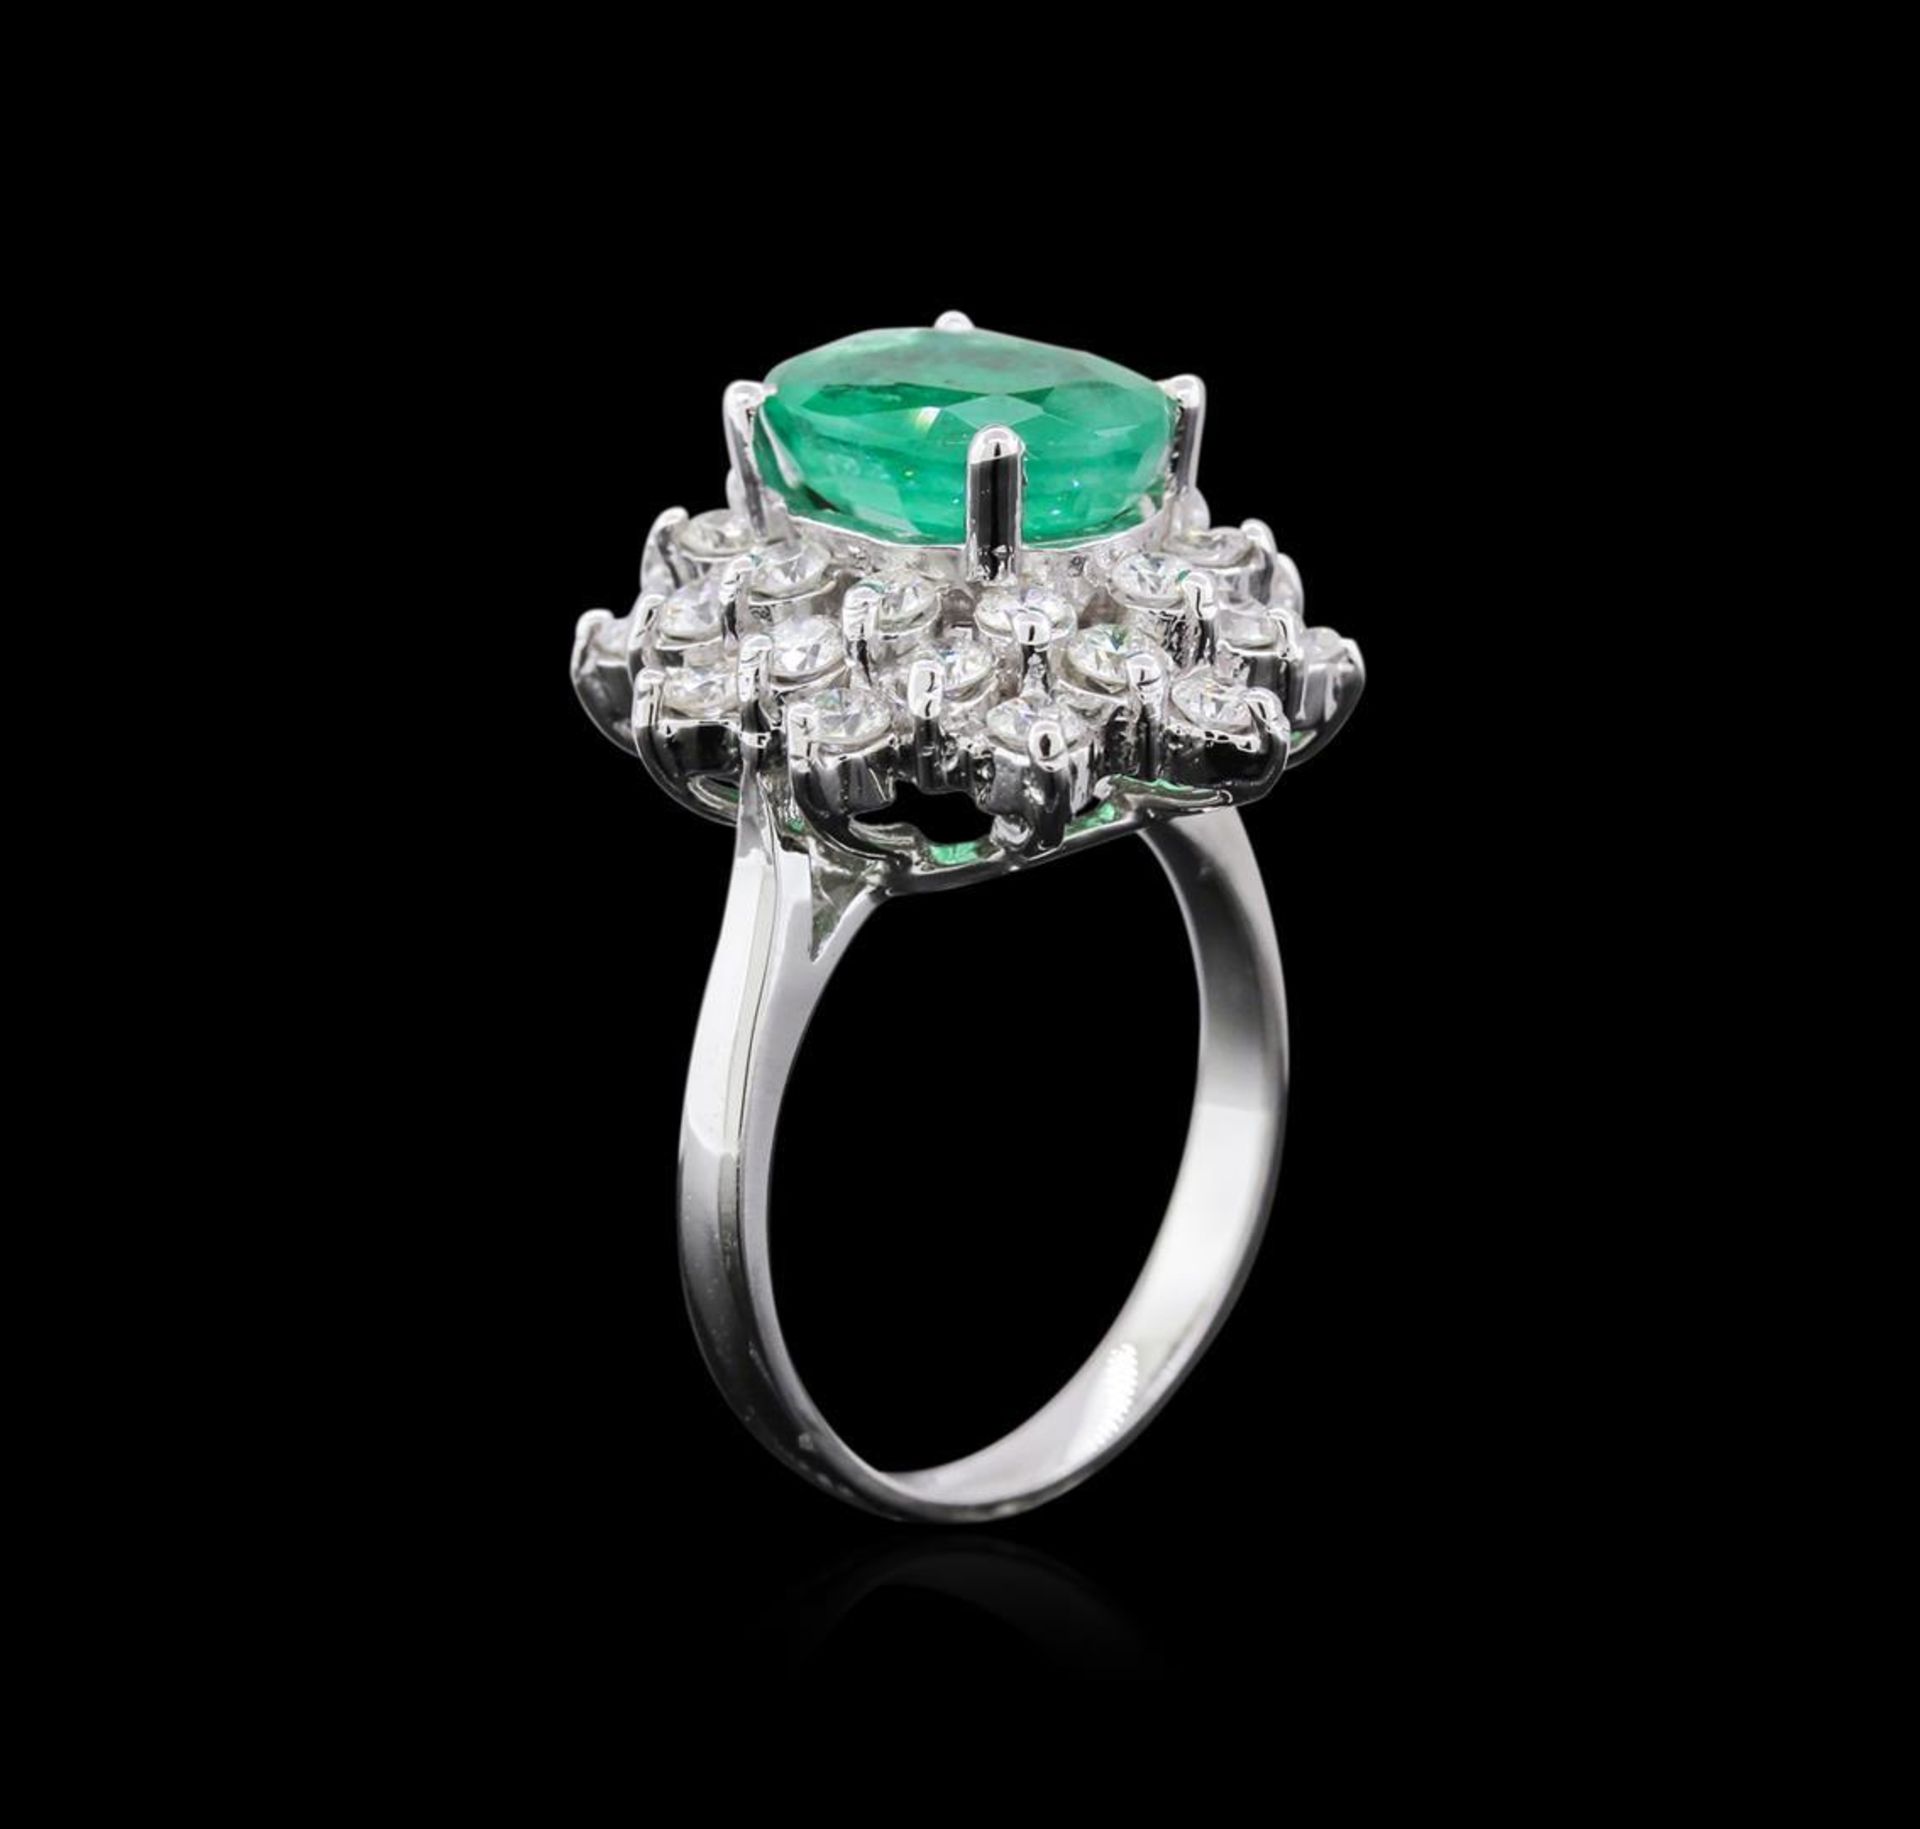 14KT White Gold 2.77 ctw Emerald and Diamond Ring - Image 3 of 4